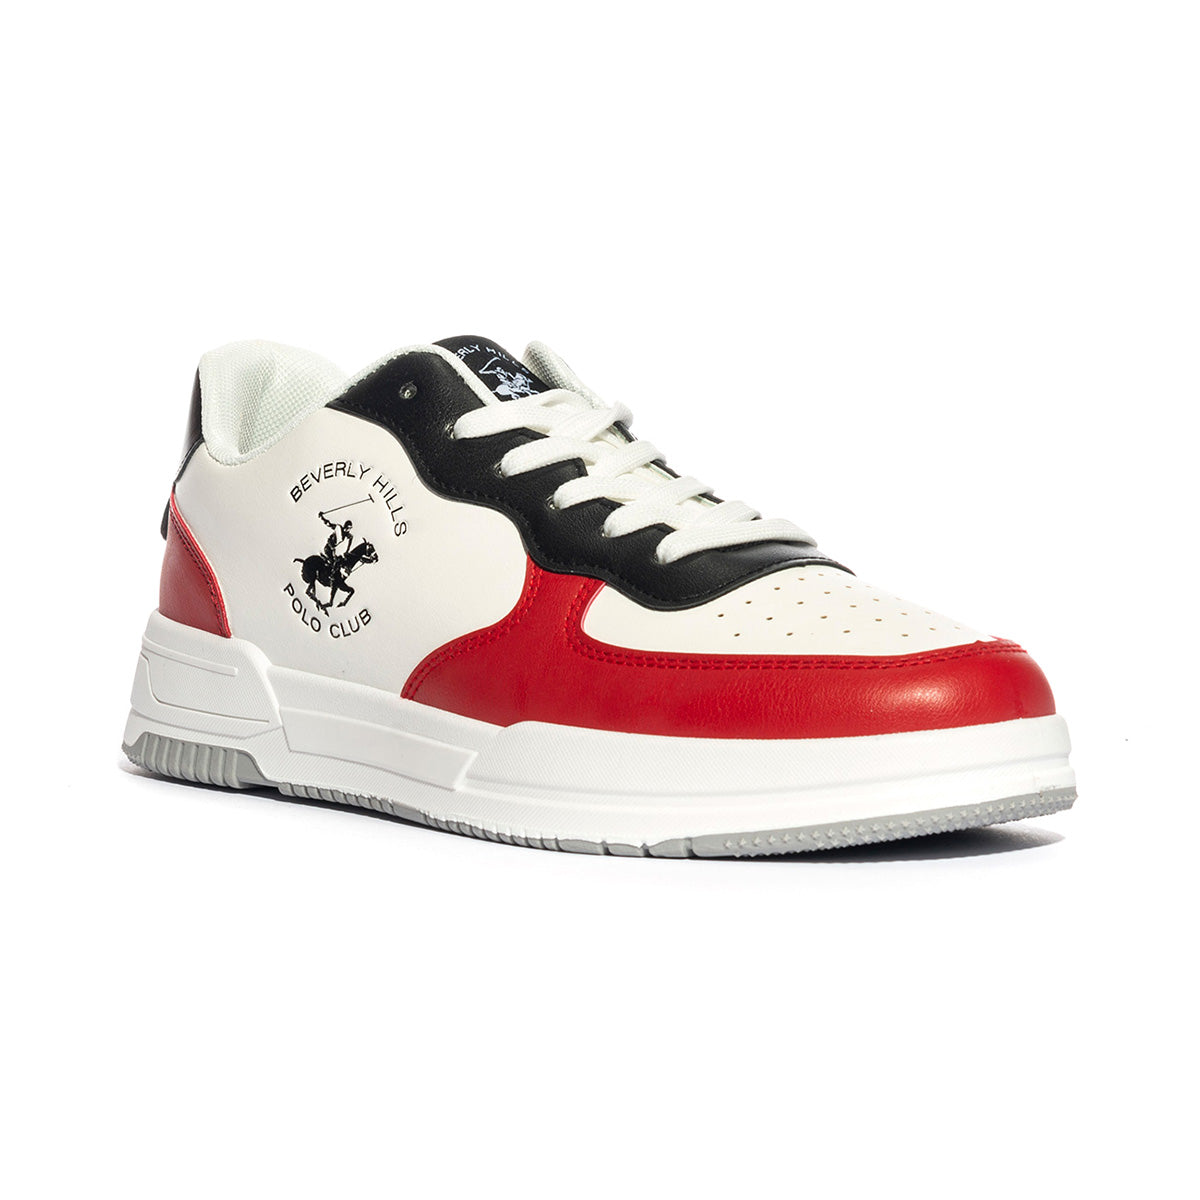 Sneakers Beverly Hills Polo Club Hm863 ROsse